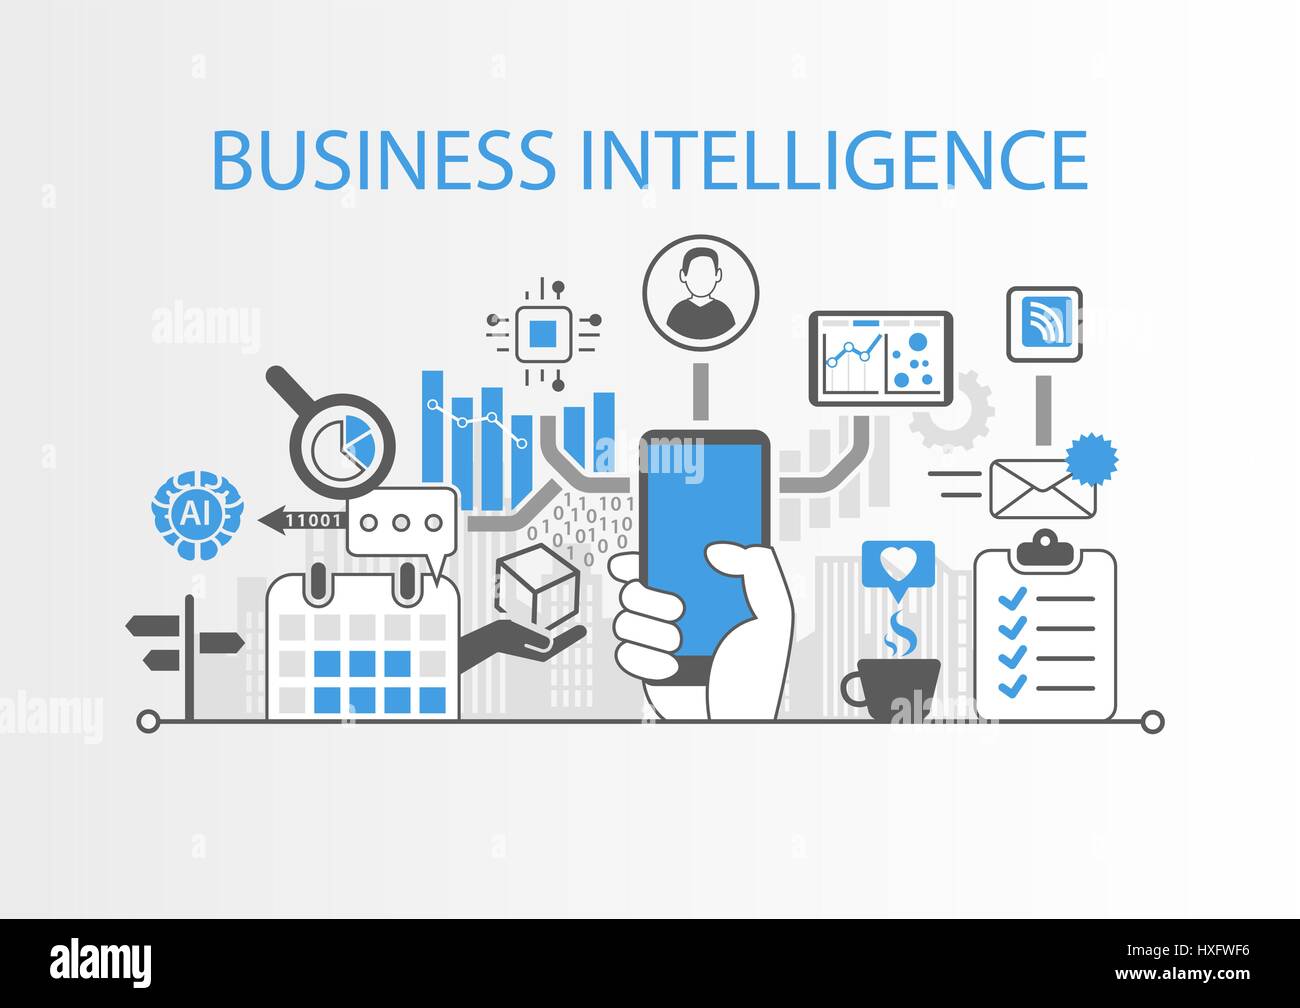 Business intelligence concept as vector background illustration with various symbols Stock Vector